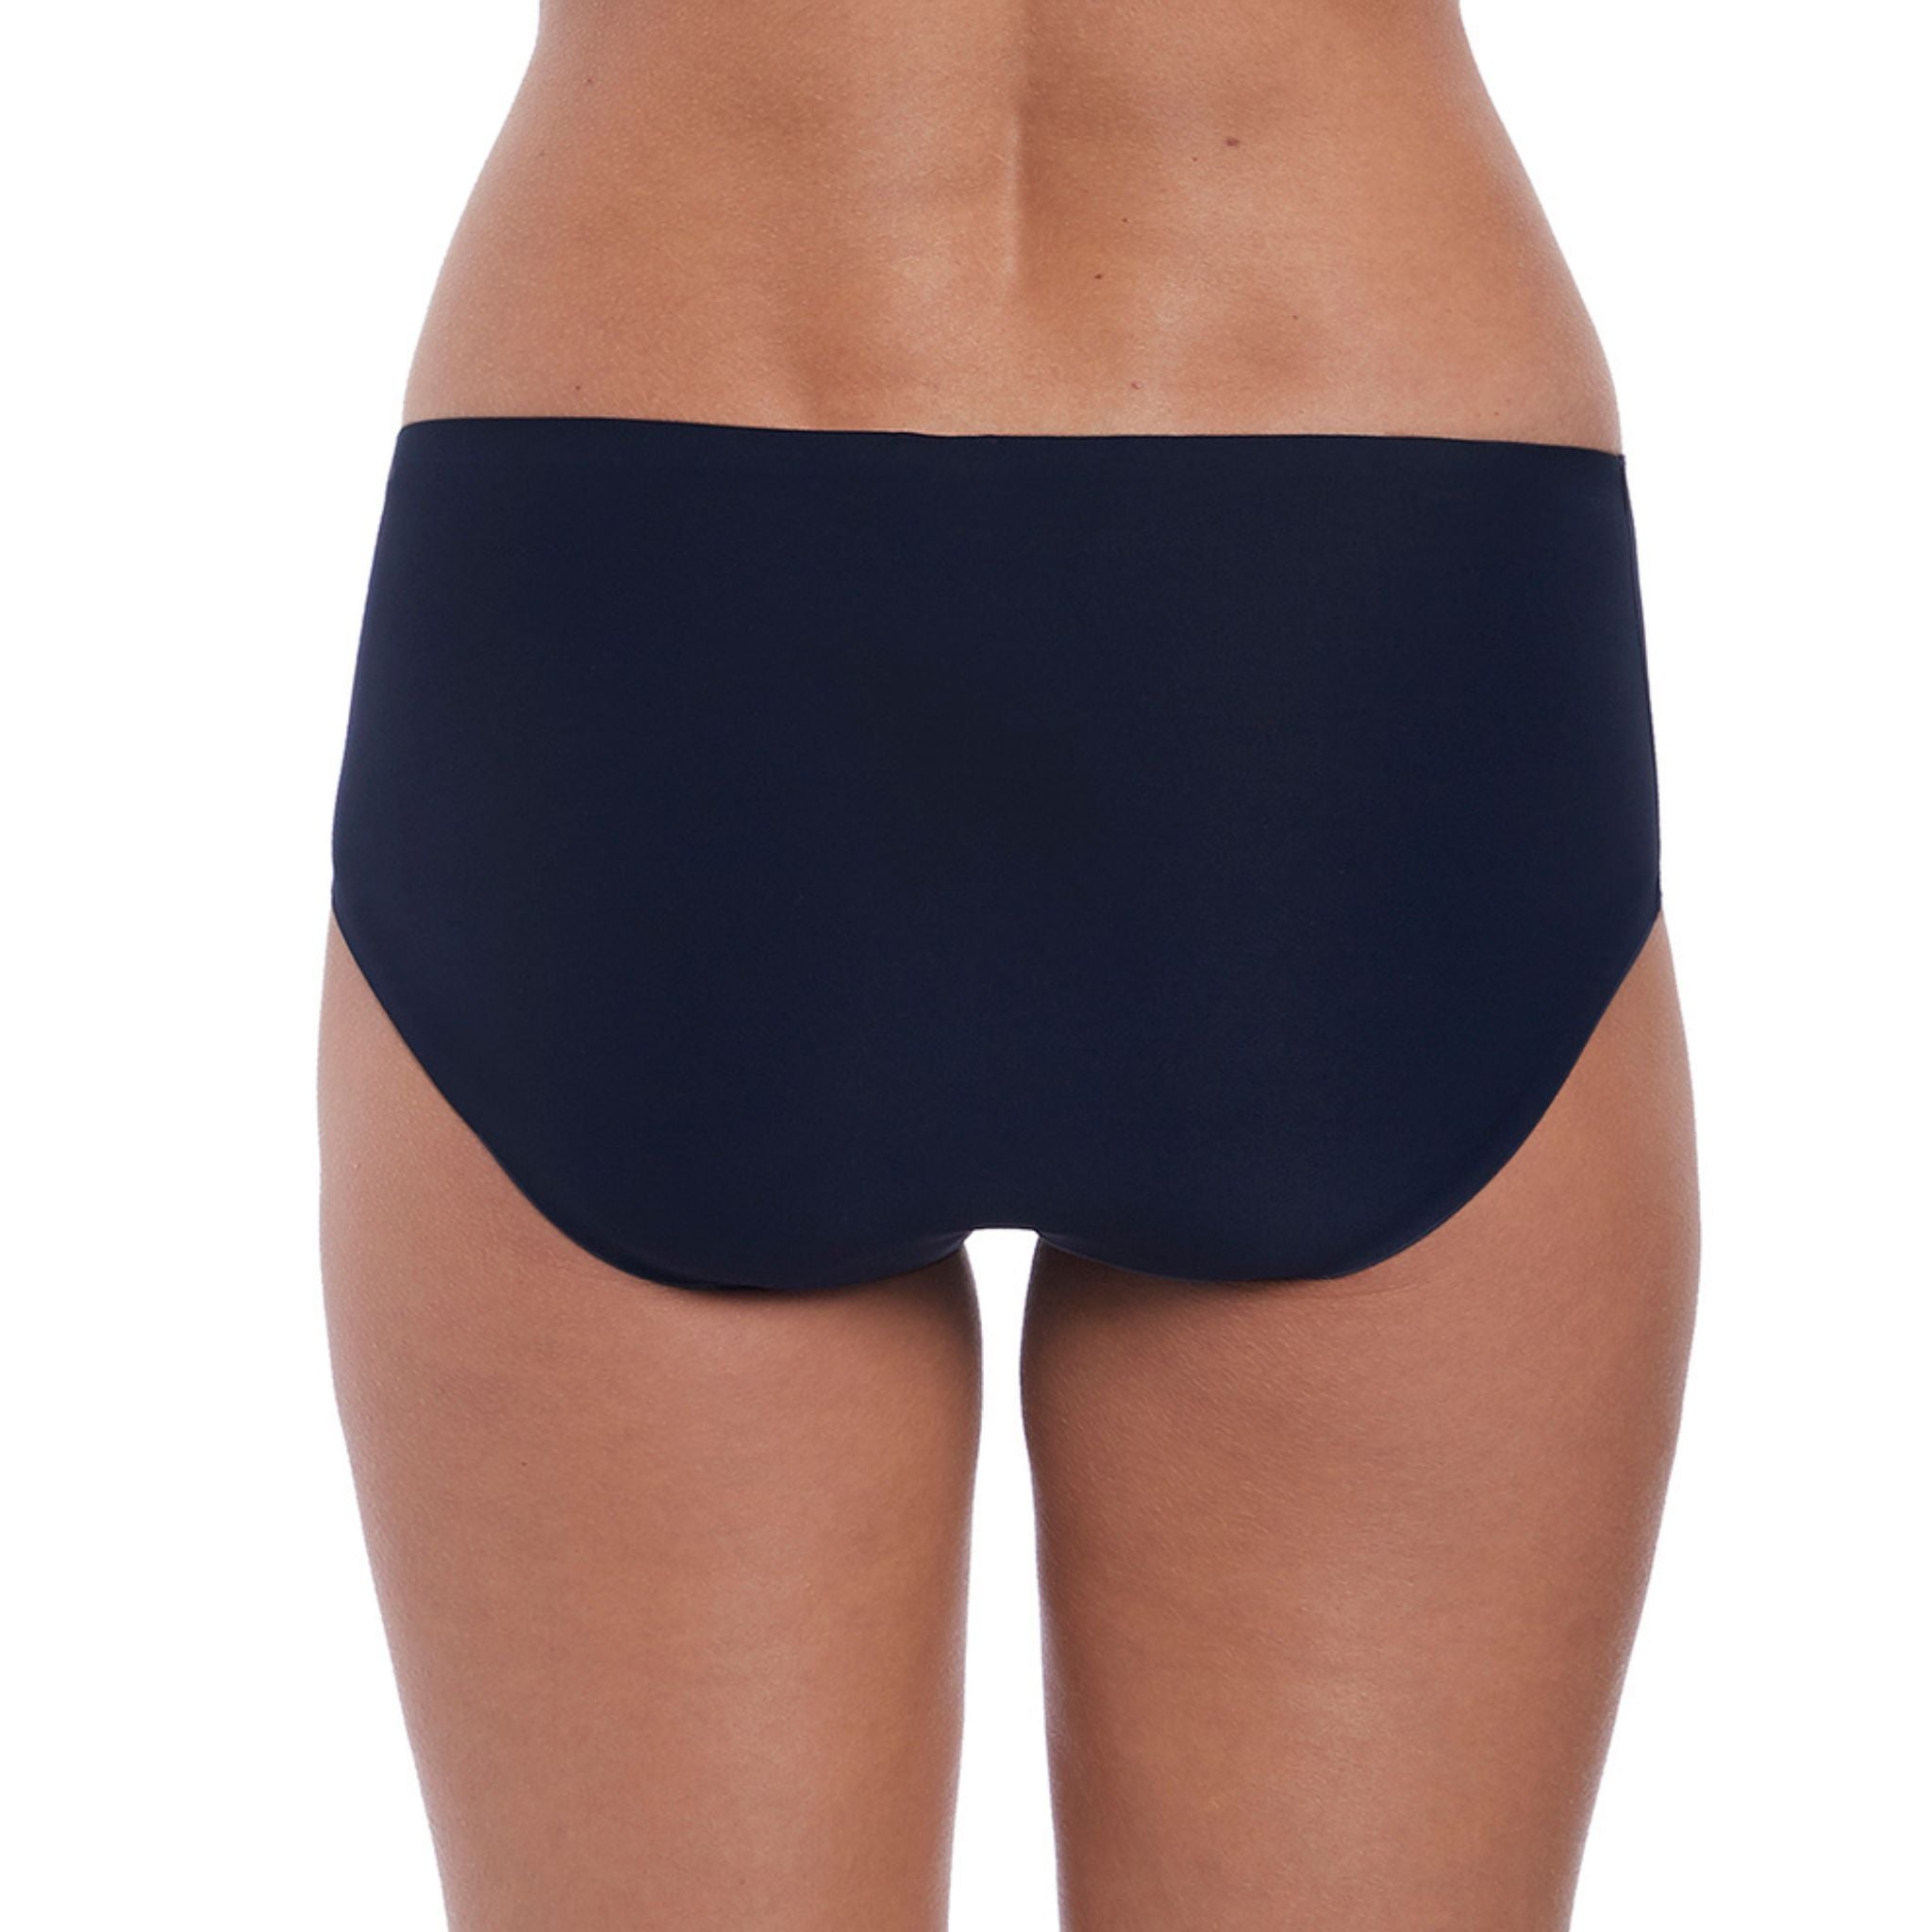 Curated from a super soft fabric and bonded with stitch-free technology, Smoothease’s second skin feel will guarantee you an exceptionally smooth finish under clothes. With optimal stretch, the Invisible Stretch Brief is one-size-fits-all, offering a comfortable alternative to match with other Fantasie products.  Average coverage brief  Soft handle fabric for smooth second skin feel  Clean cut and stitch free with bonded seams for a complete no show finish